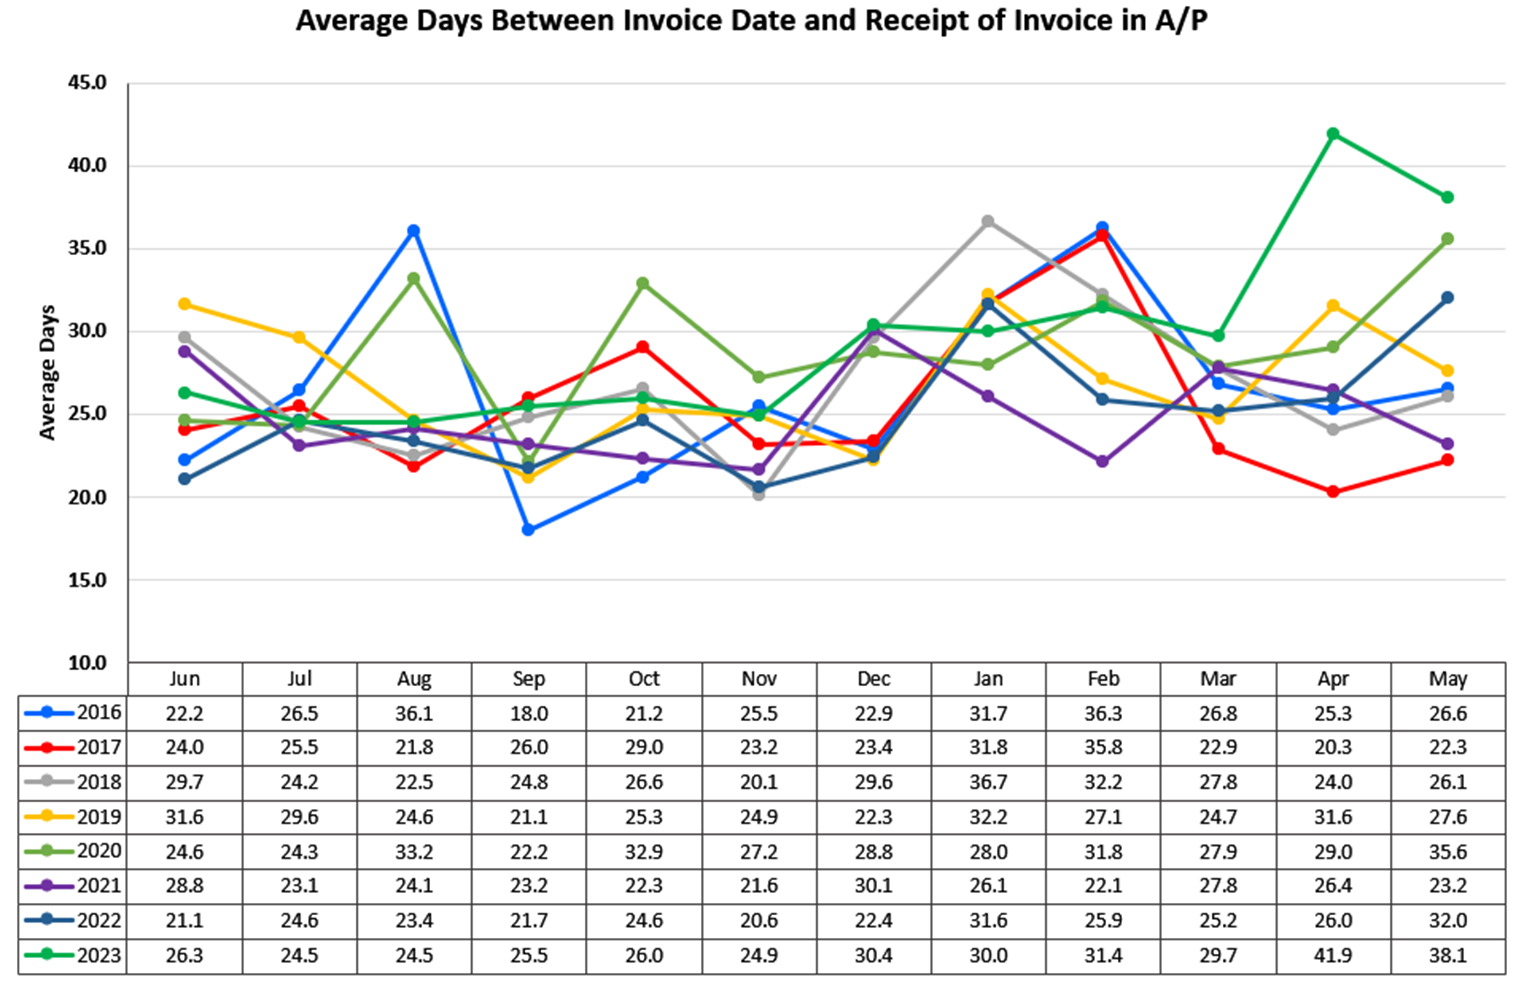 Average Days Between Invoice Date and Receipt of Invoice in A/P